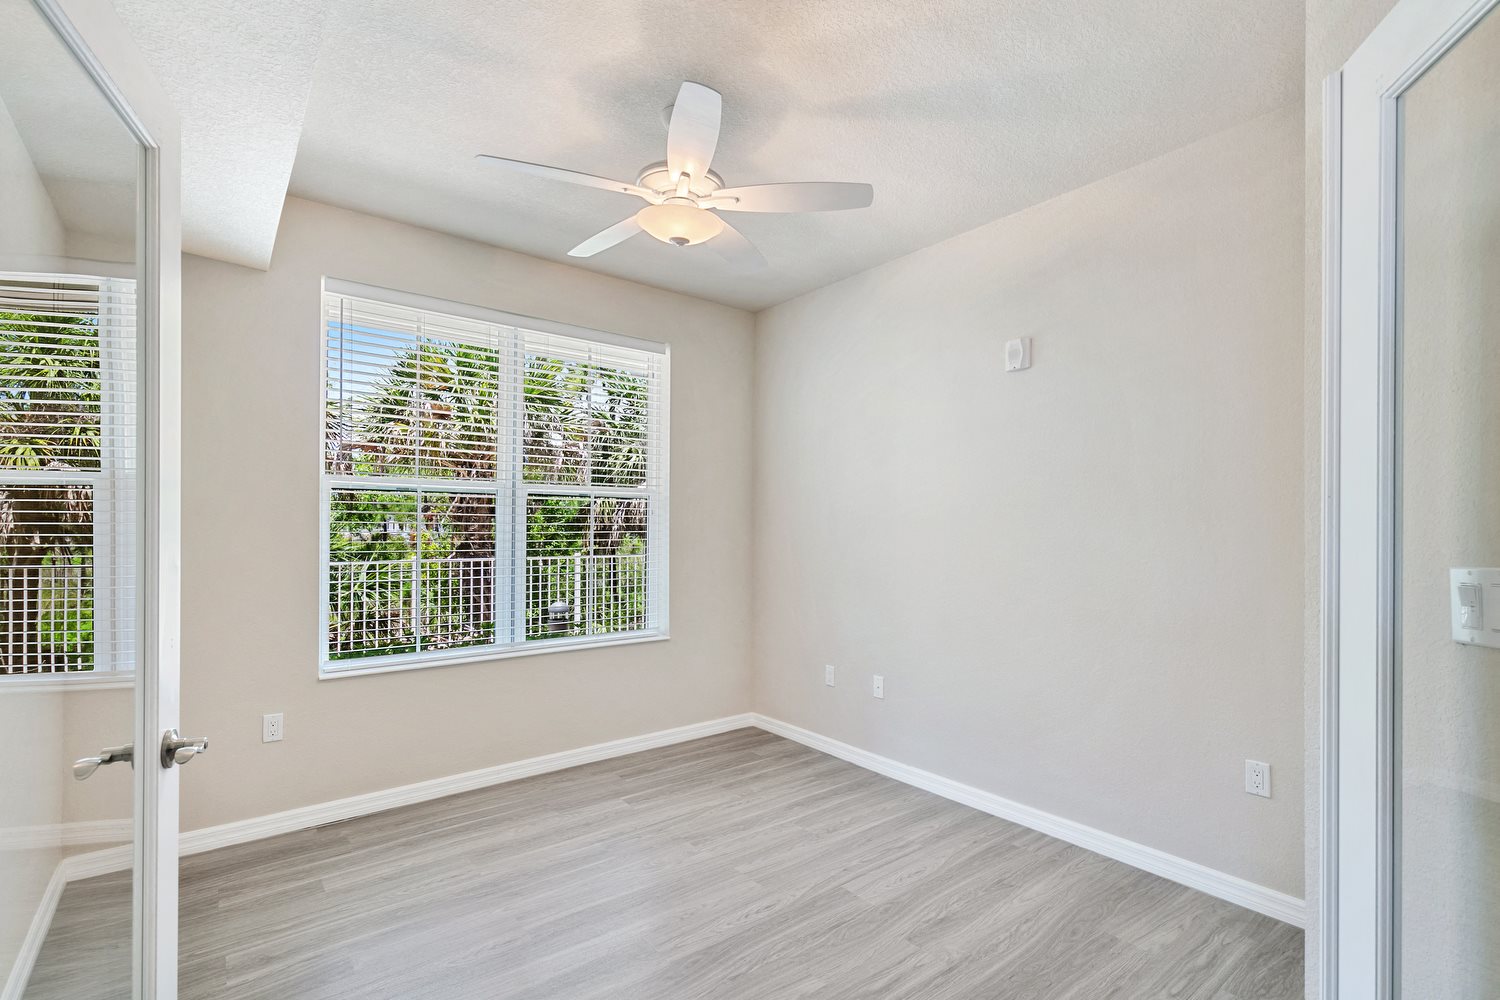 Photos and Video of Lemon Bay Apartments in Englewood, FL